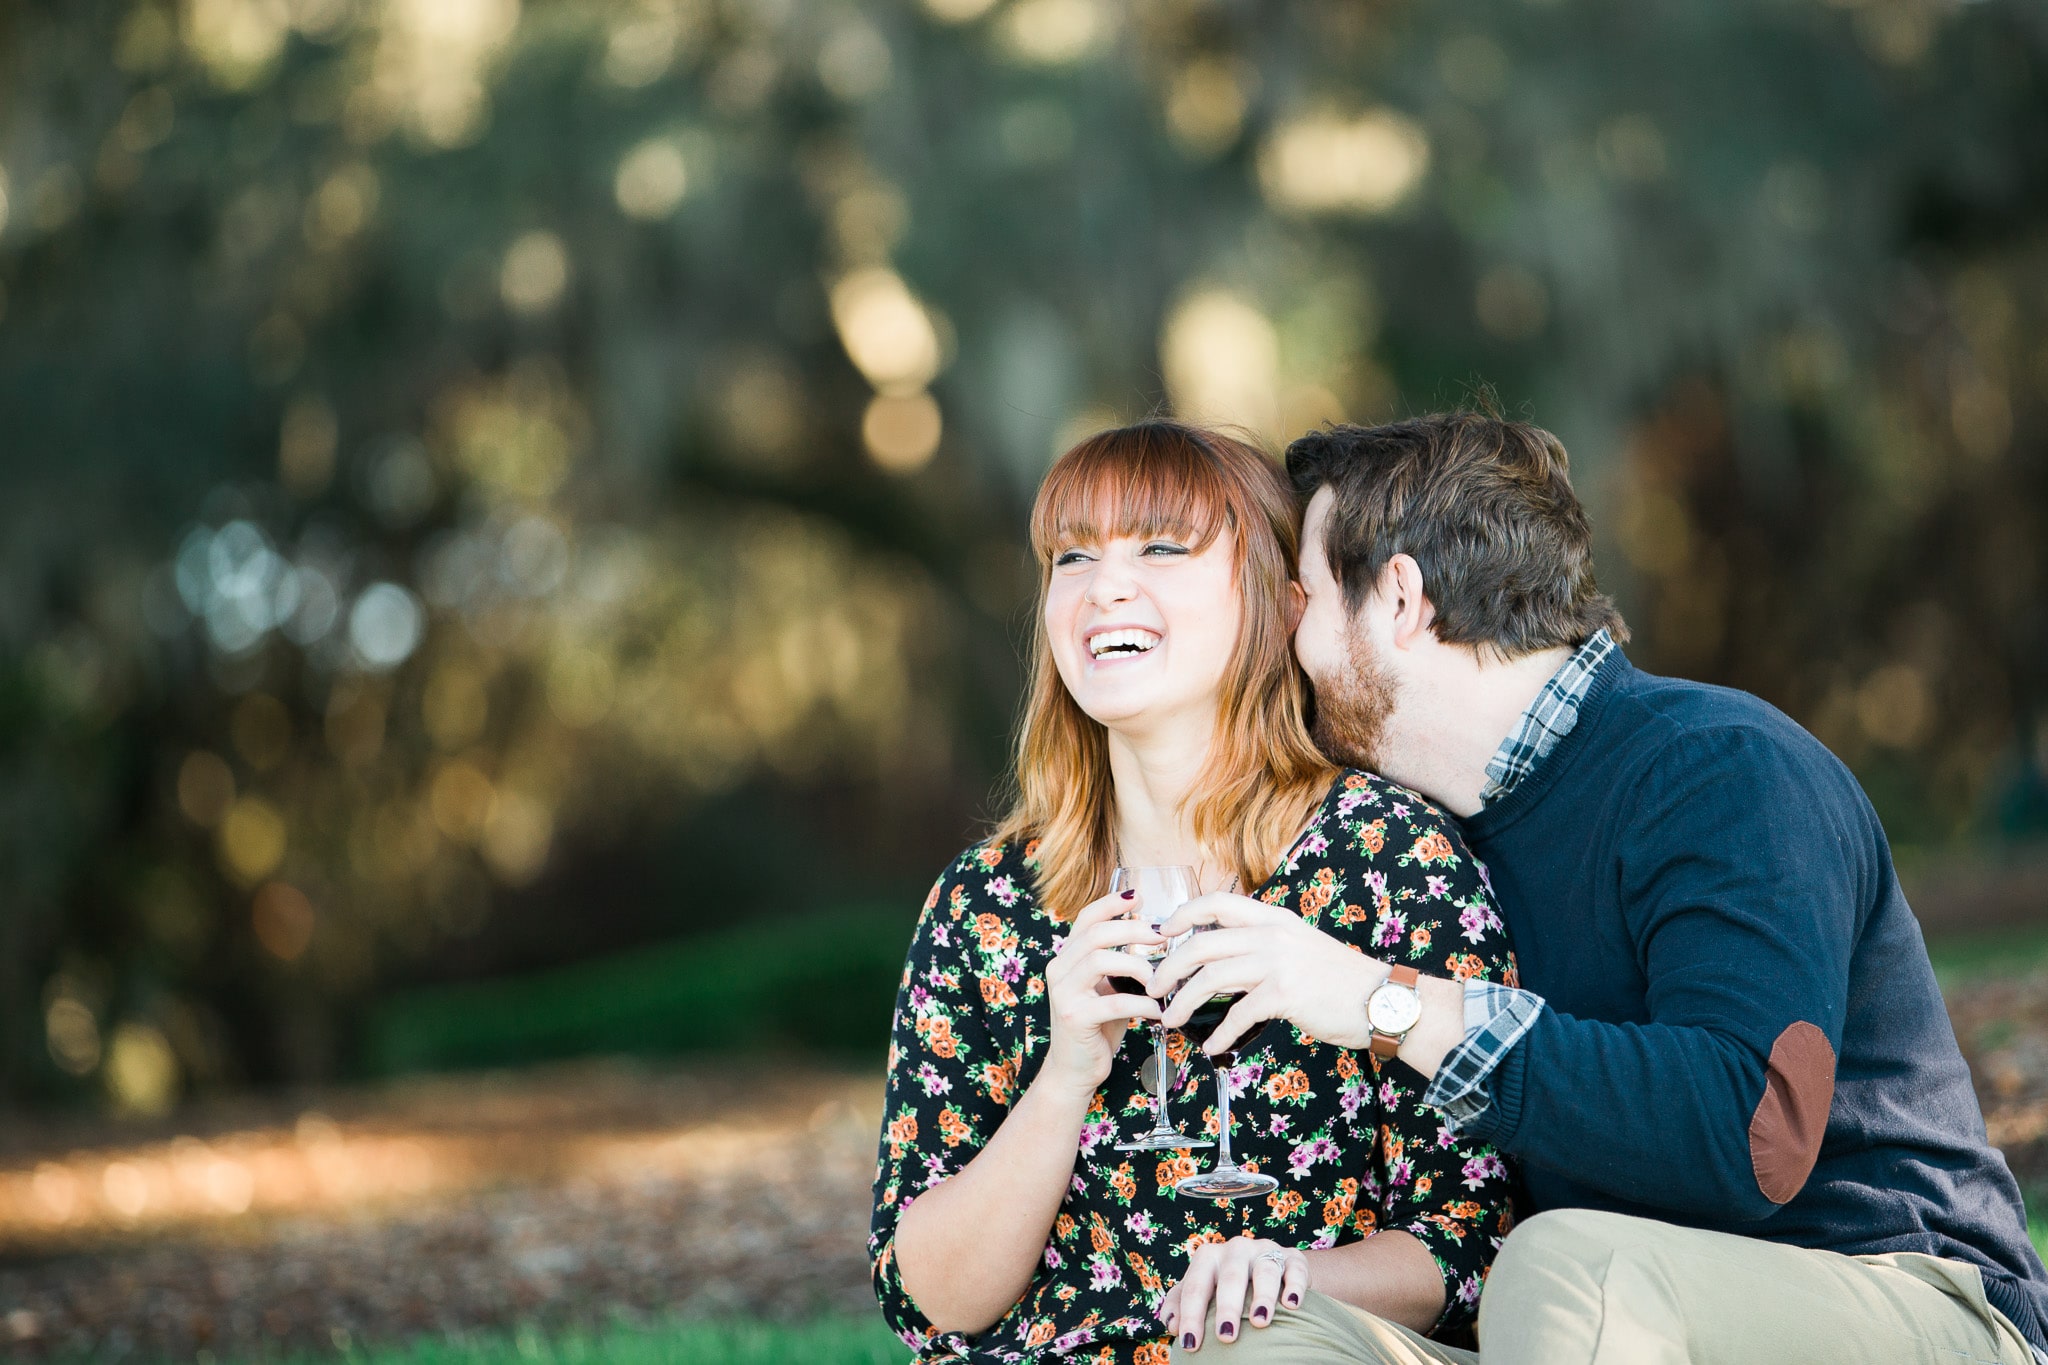 Brian whispering a joke in her ear and Kelsey laughing, Caledonia Golf and Fish Club, Myrtle Beach Engagement Session 13, www.onelifephoto.net